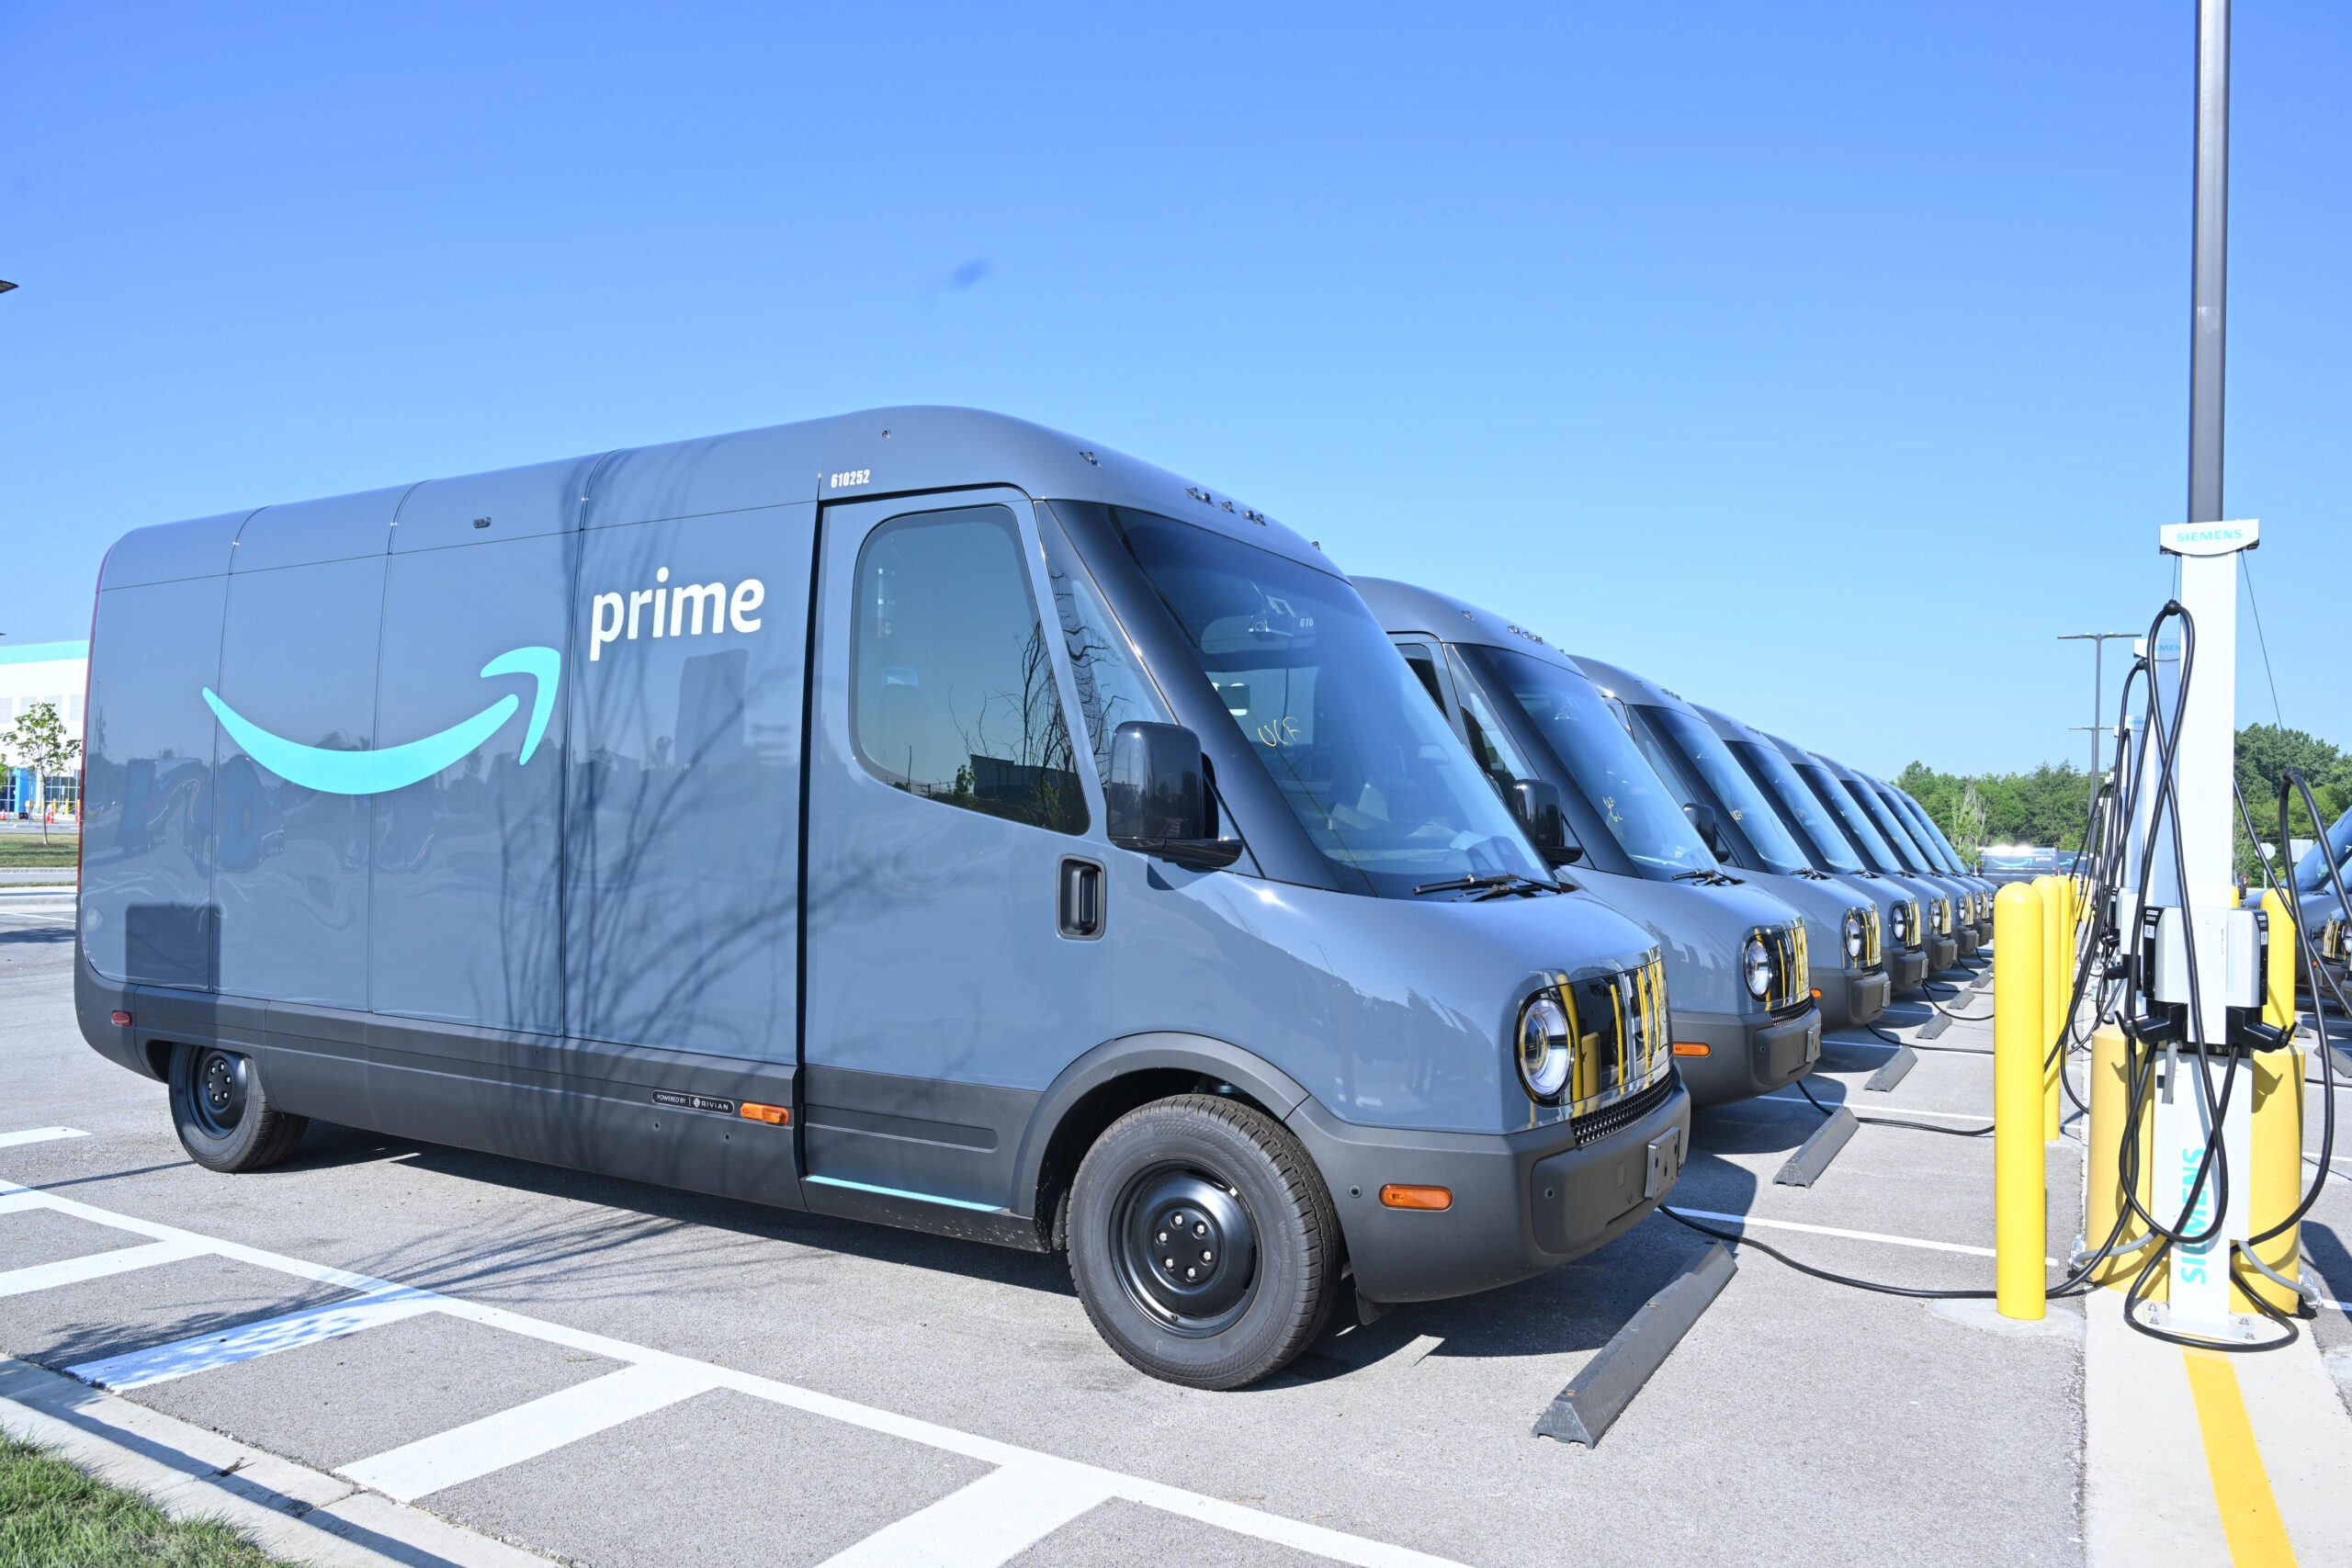 Amazon’s new electric vans will be making deliveries in over 100 U.S. cities this holiday season ...